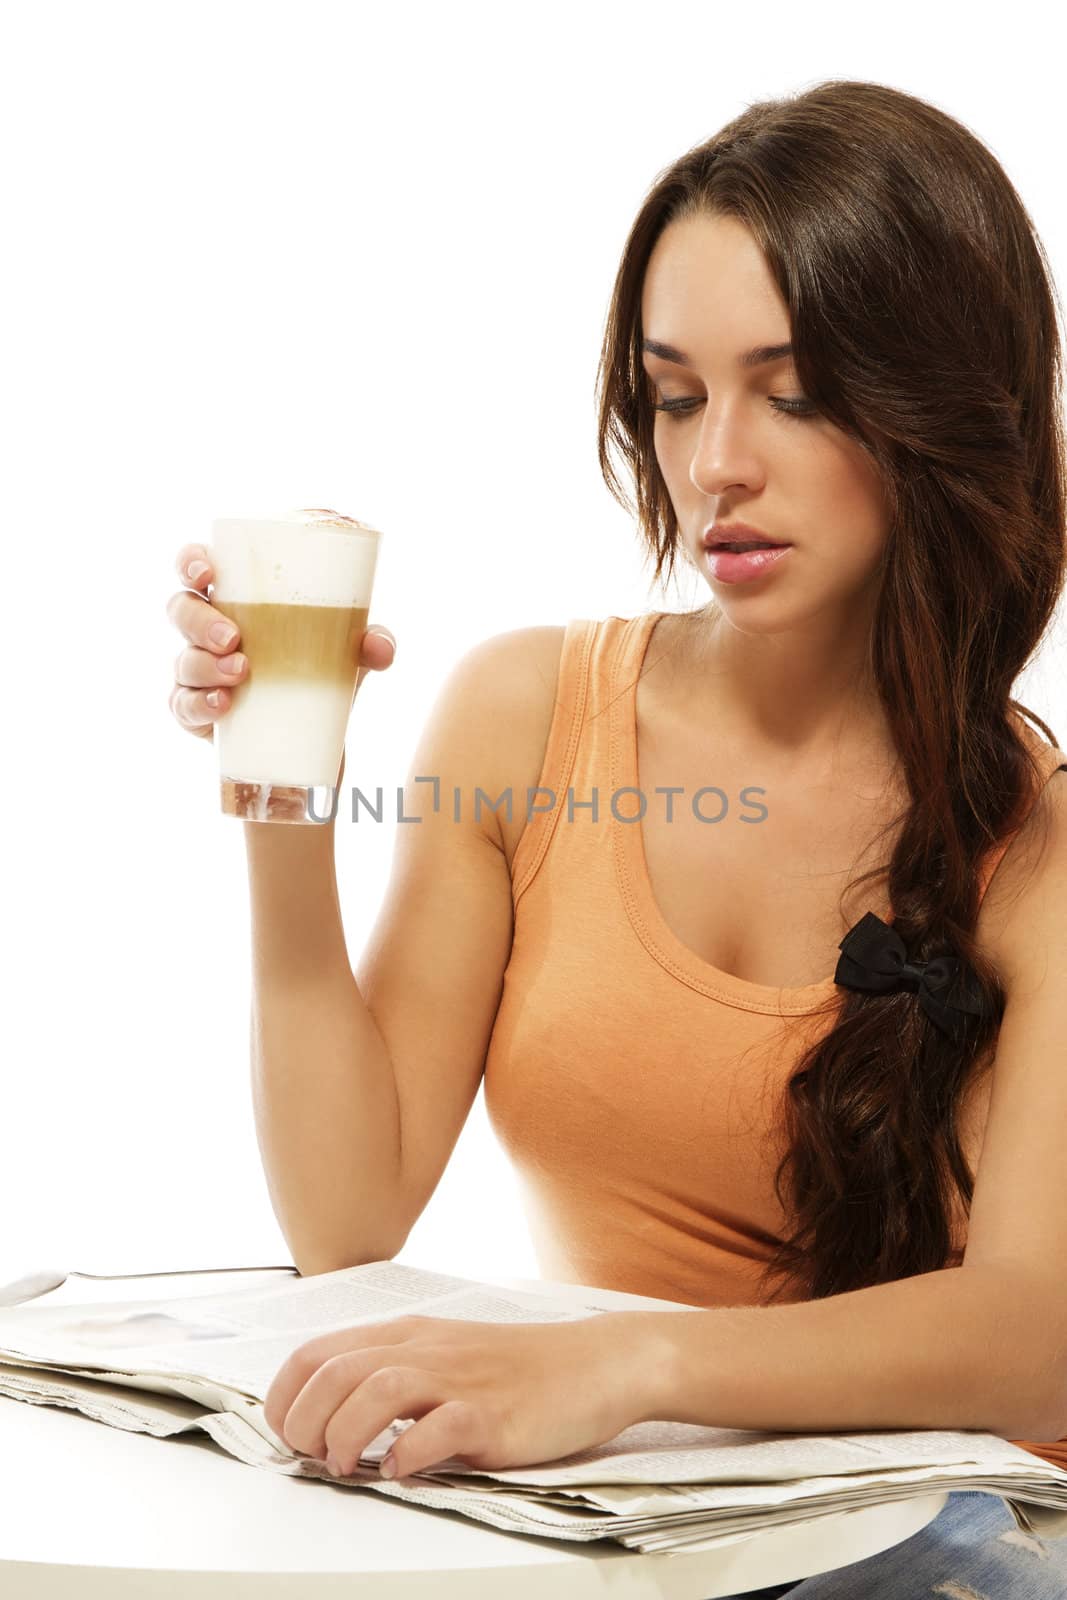 young woman sitting at a table reading newspaper holding latte macchiato coffee on white background